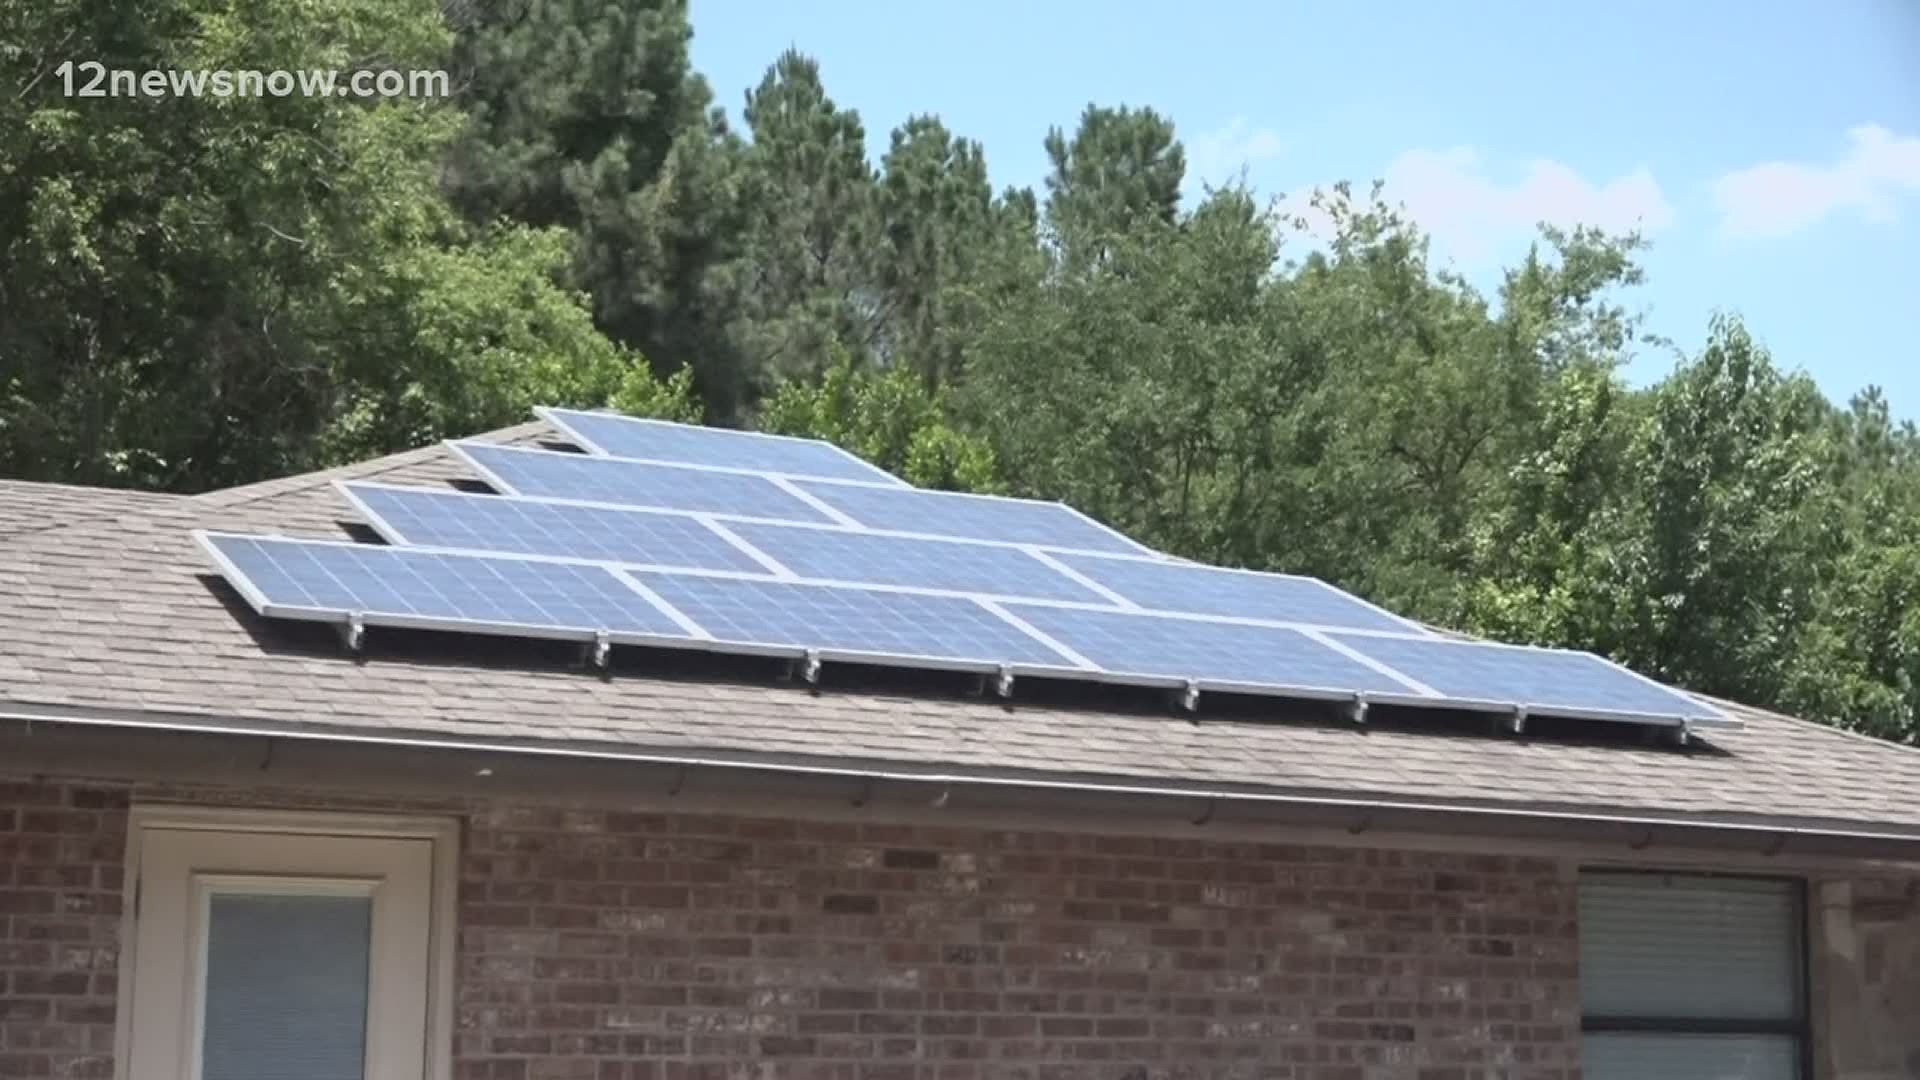 One Southeast Texas couple uses solar panels for their local art studio.